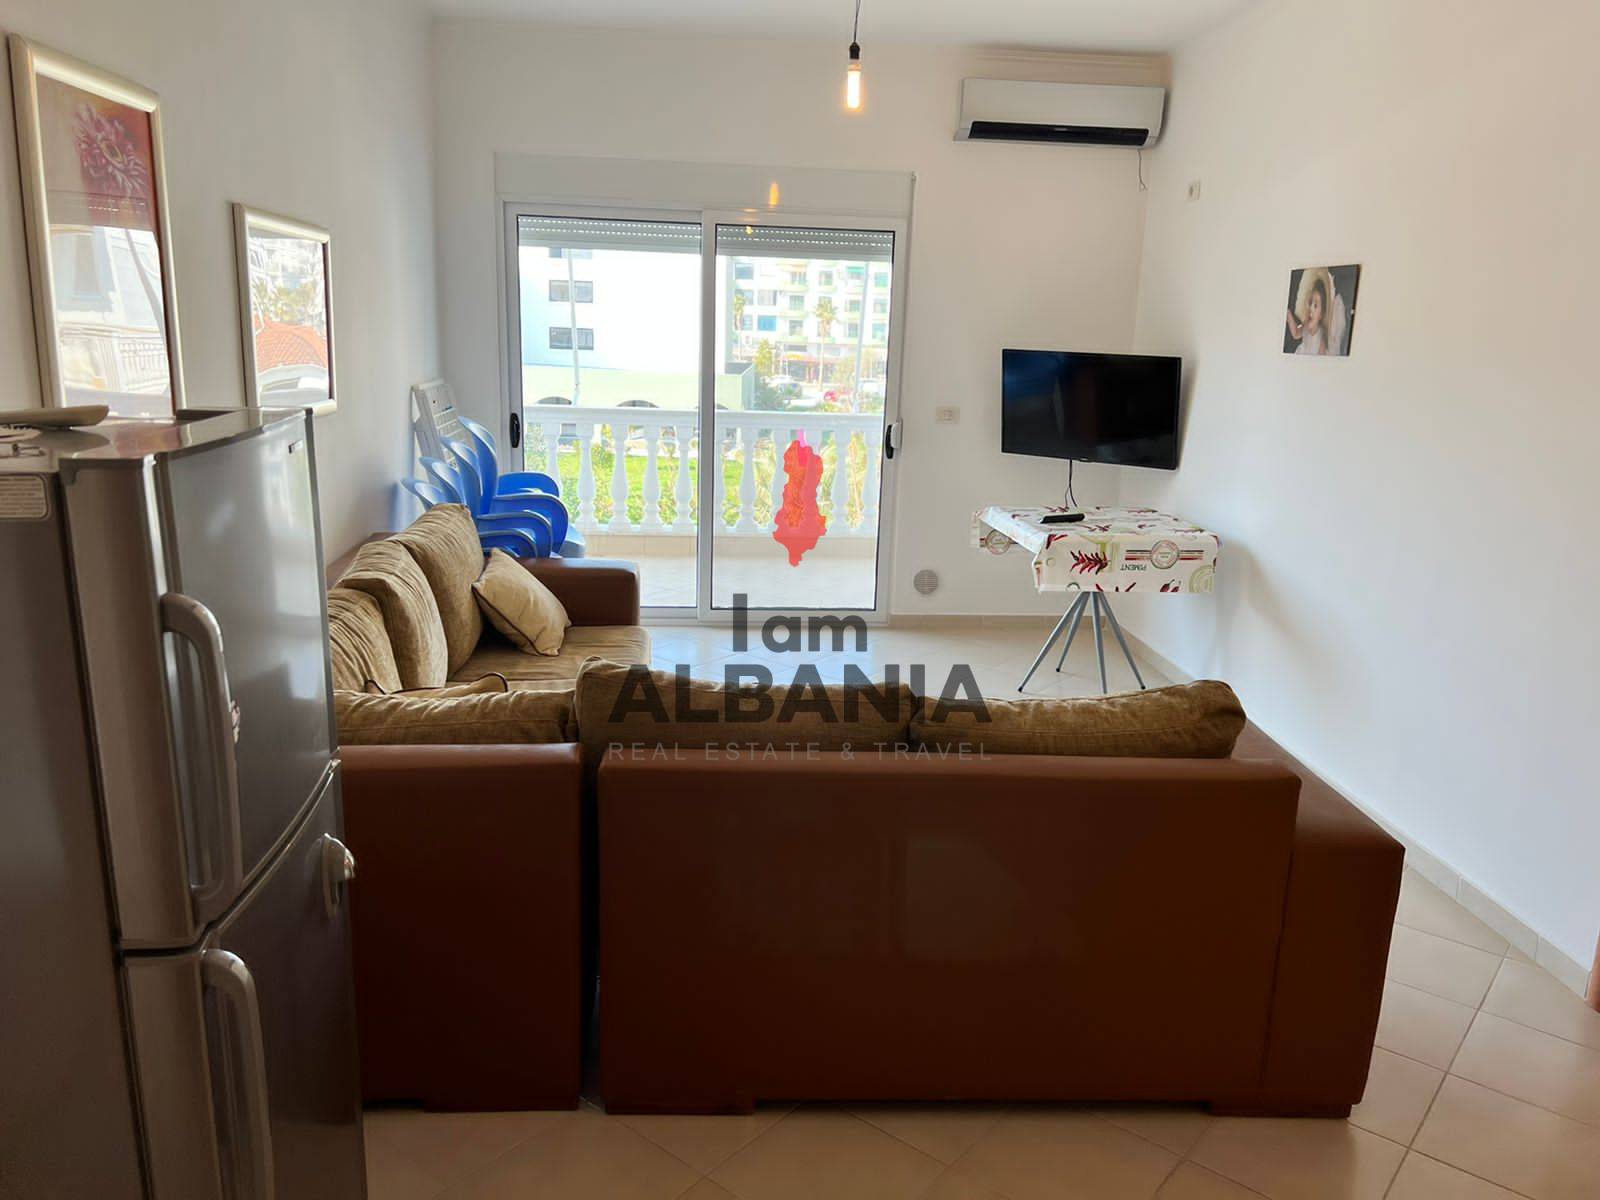 Albania, 2 bedroom apartment suitable for rent